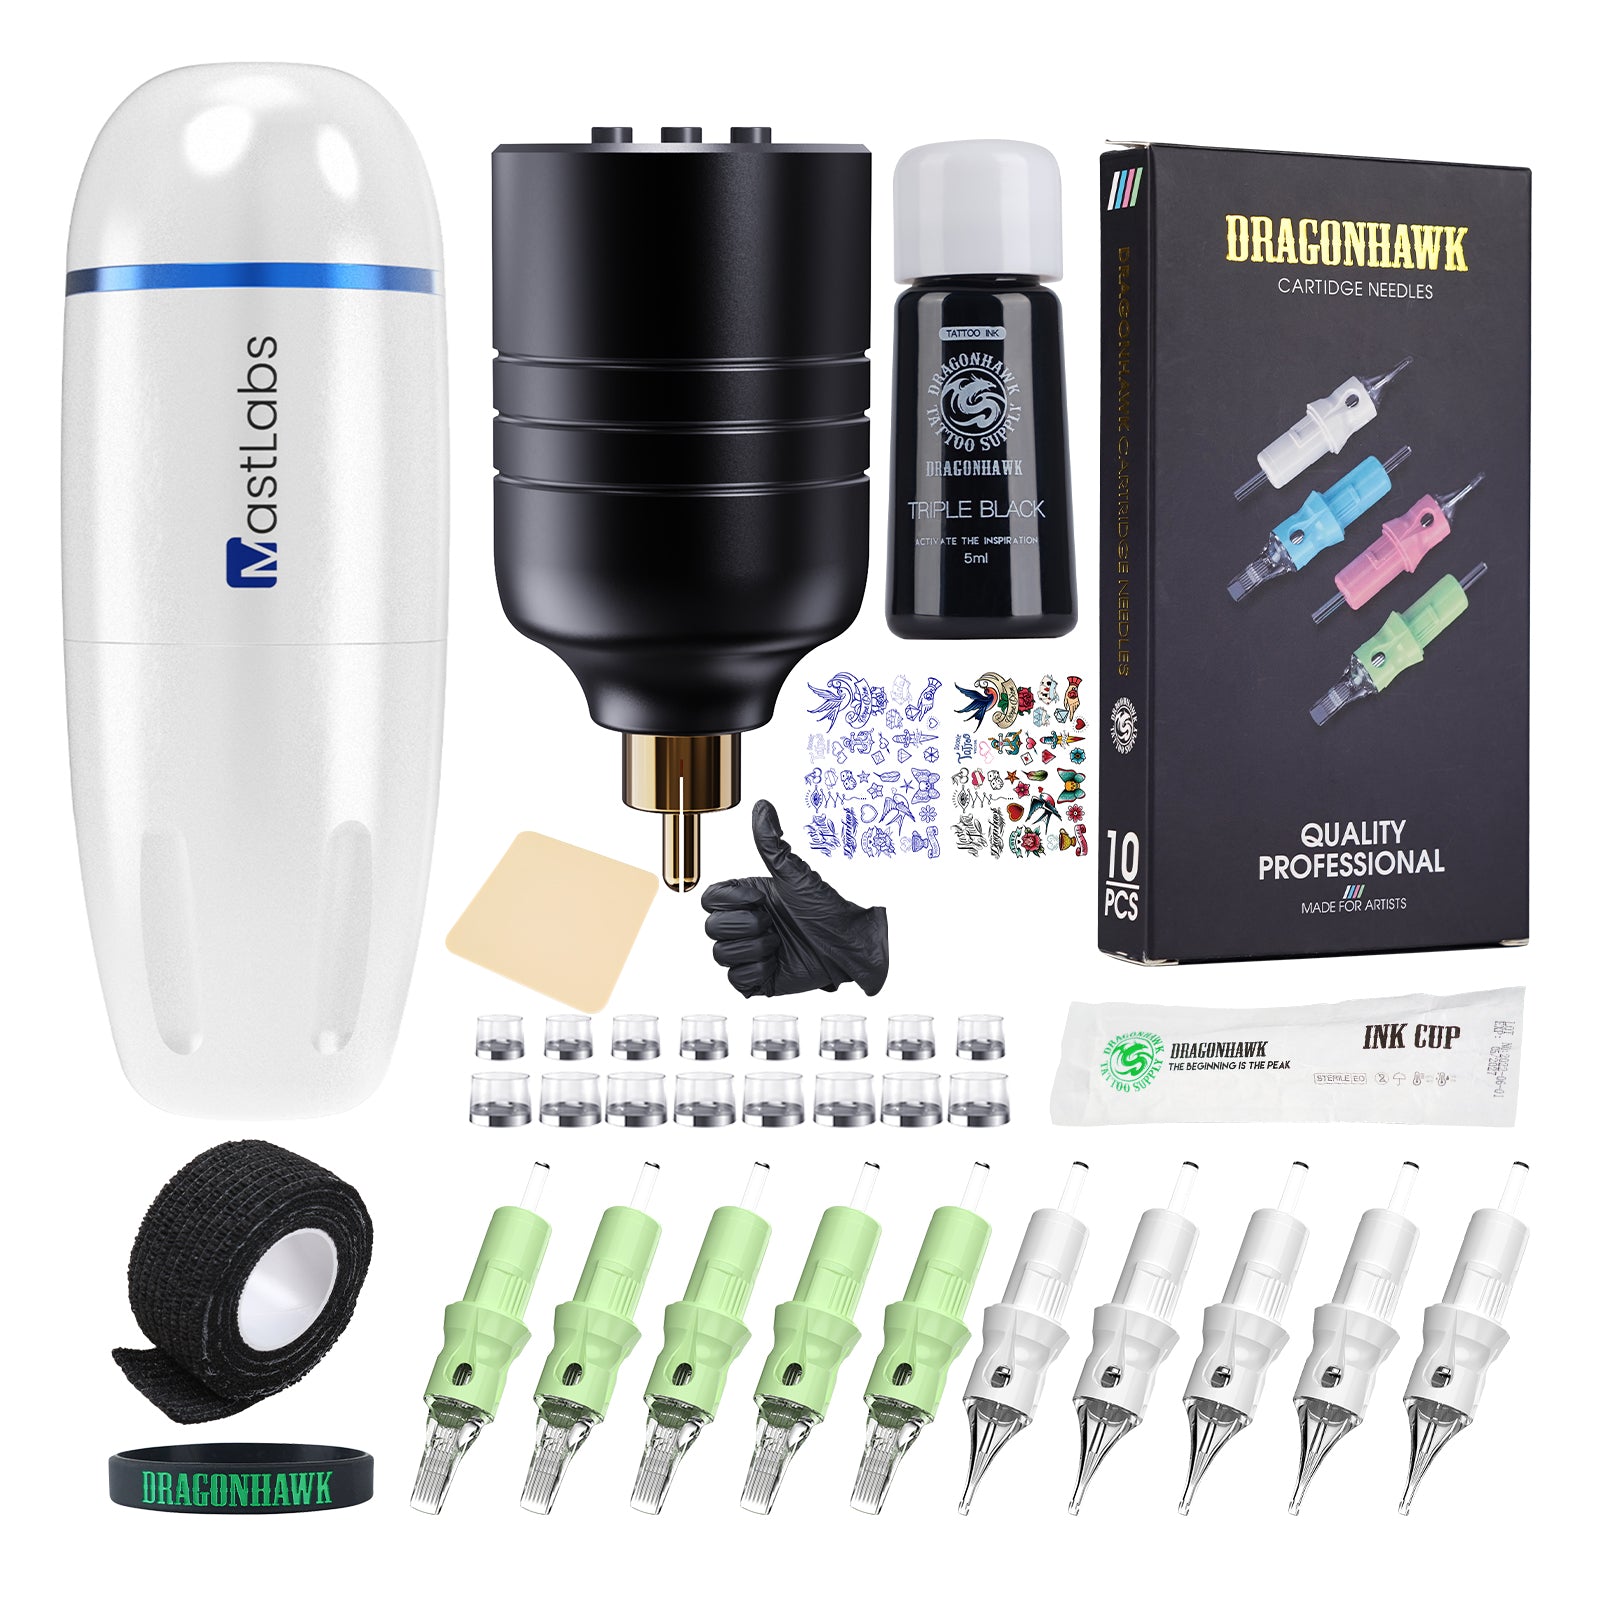 Dragonhawk Tattoo Kit Review - The Starter Kit You've Been Waiting For?